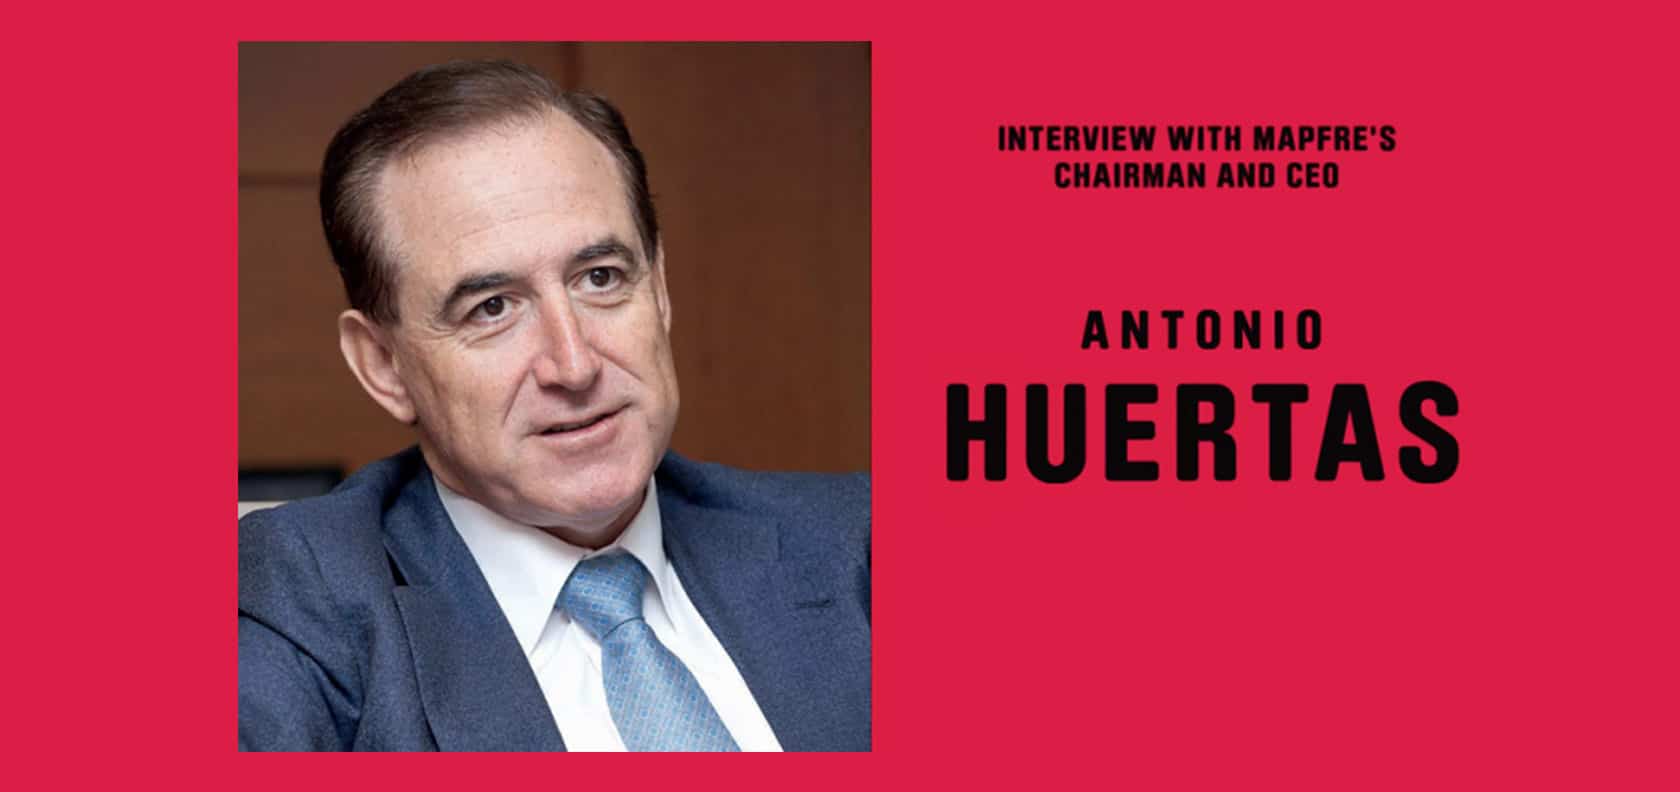 Interview with Ceo and Chairman of Mapfre, Antonio Huertas